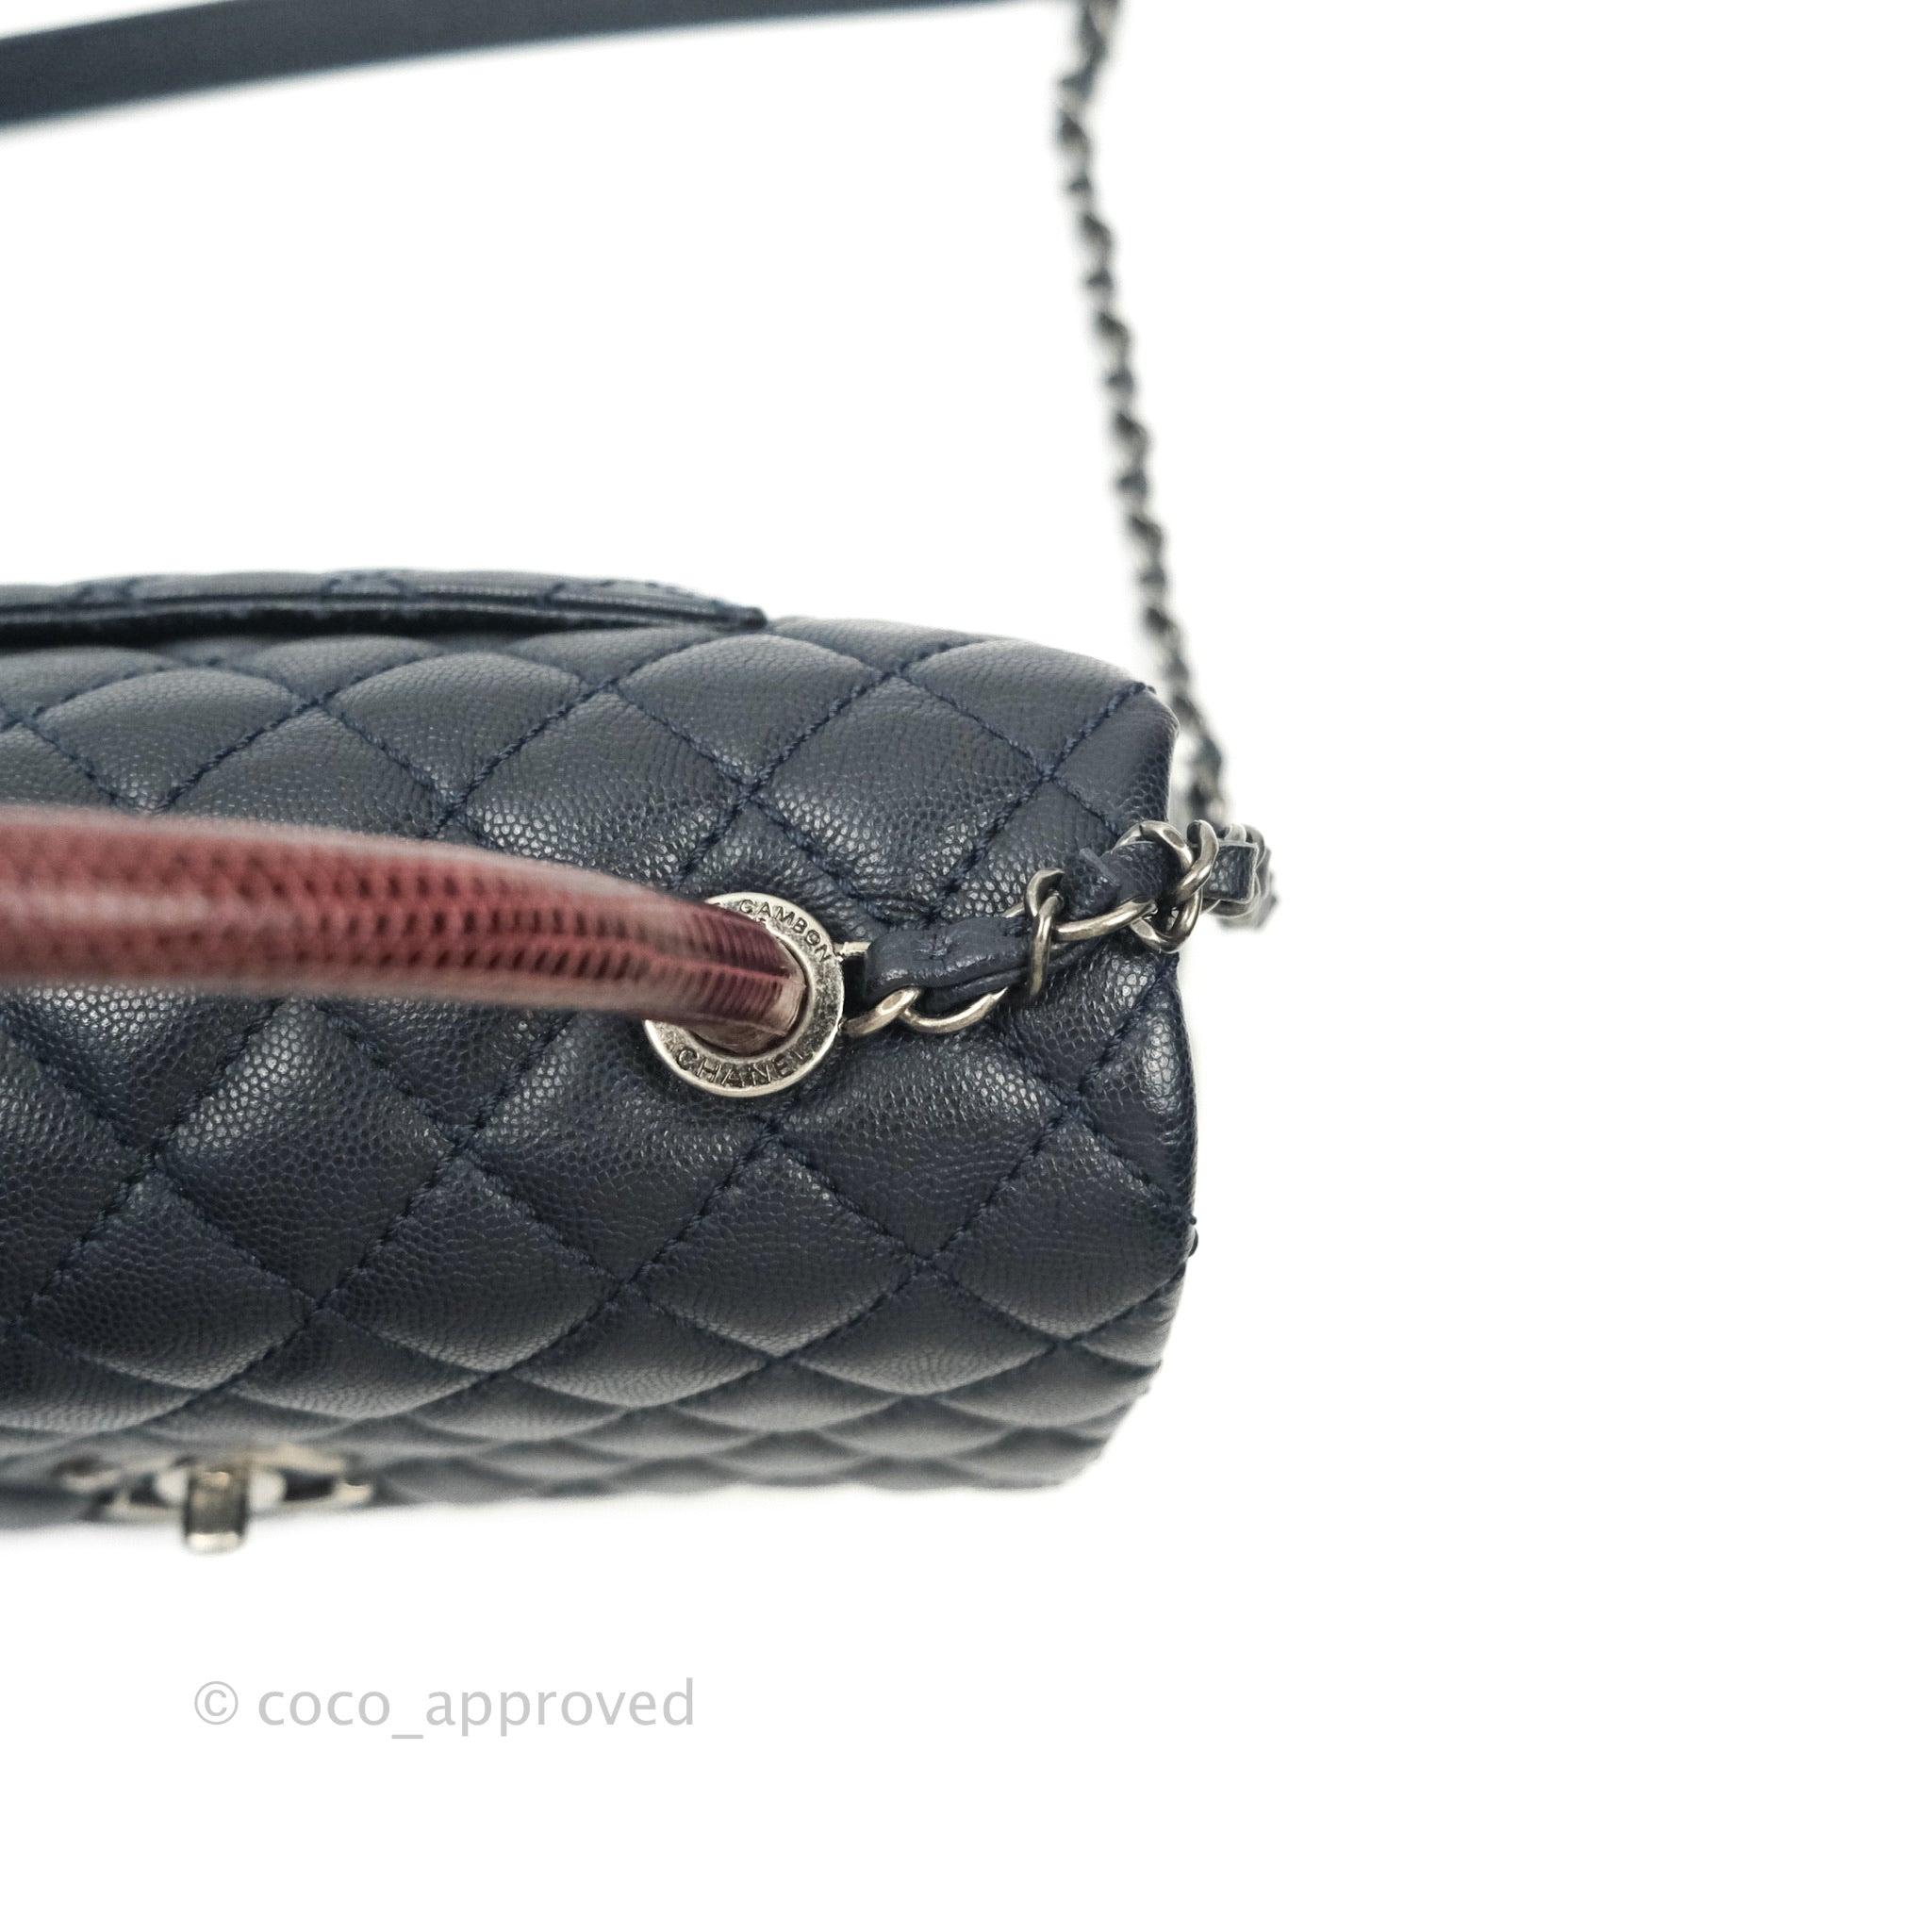 Chanel Dark Blue Quilted Caviar Leather Easy Flap Bag Chanel